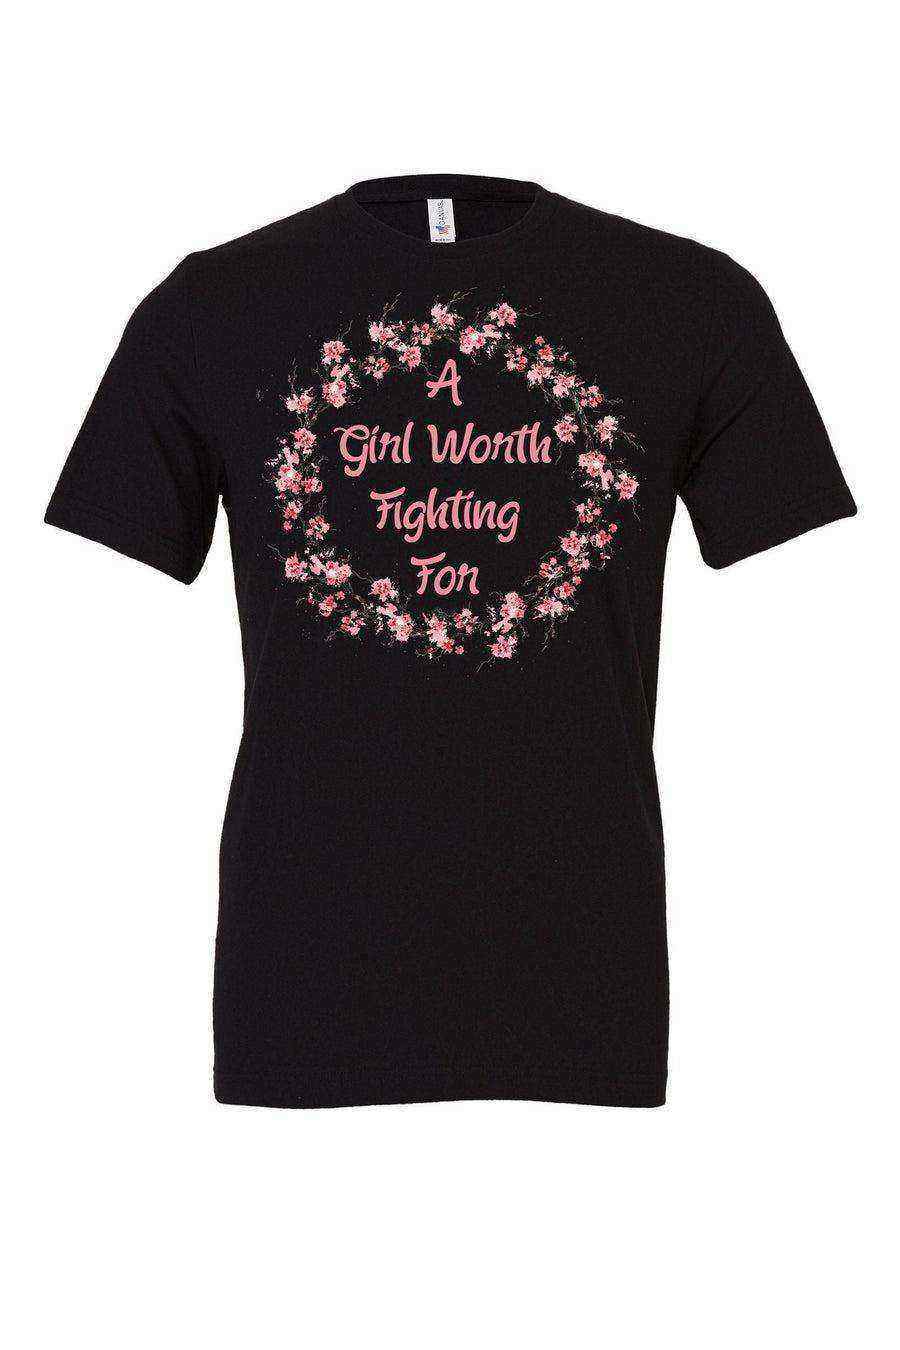 Mulan Shirt | A Girl Worth Fighting For - Dylan's Tees